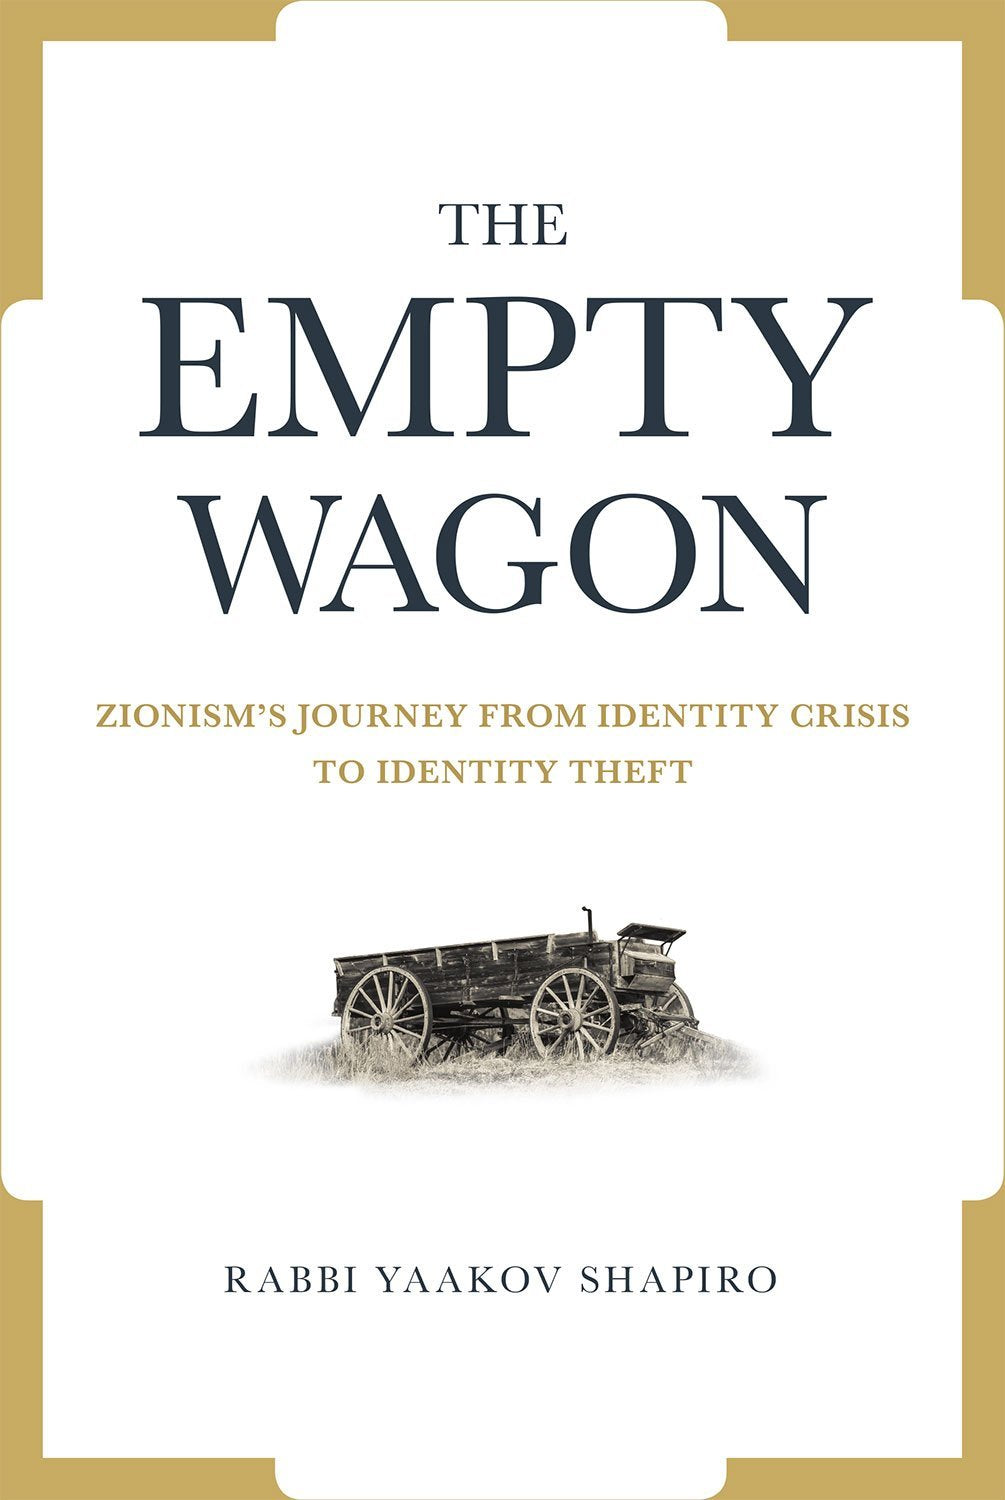 The Empty Wagon - Zionism's journey from identity crisis to identity theft